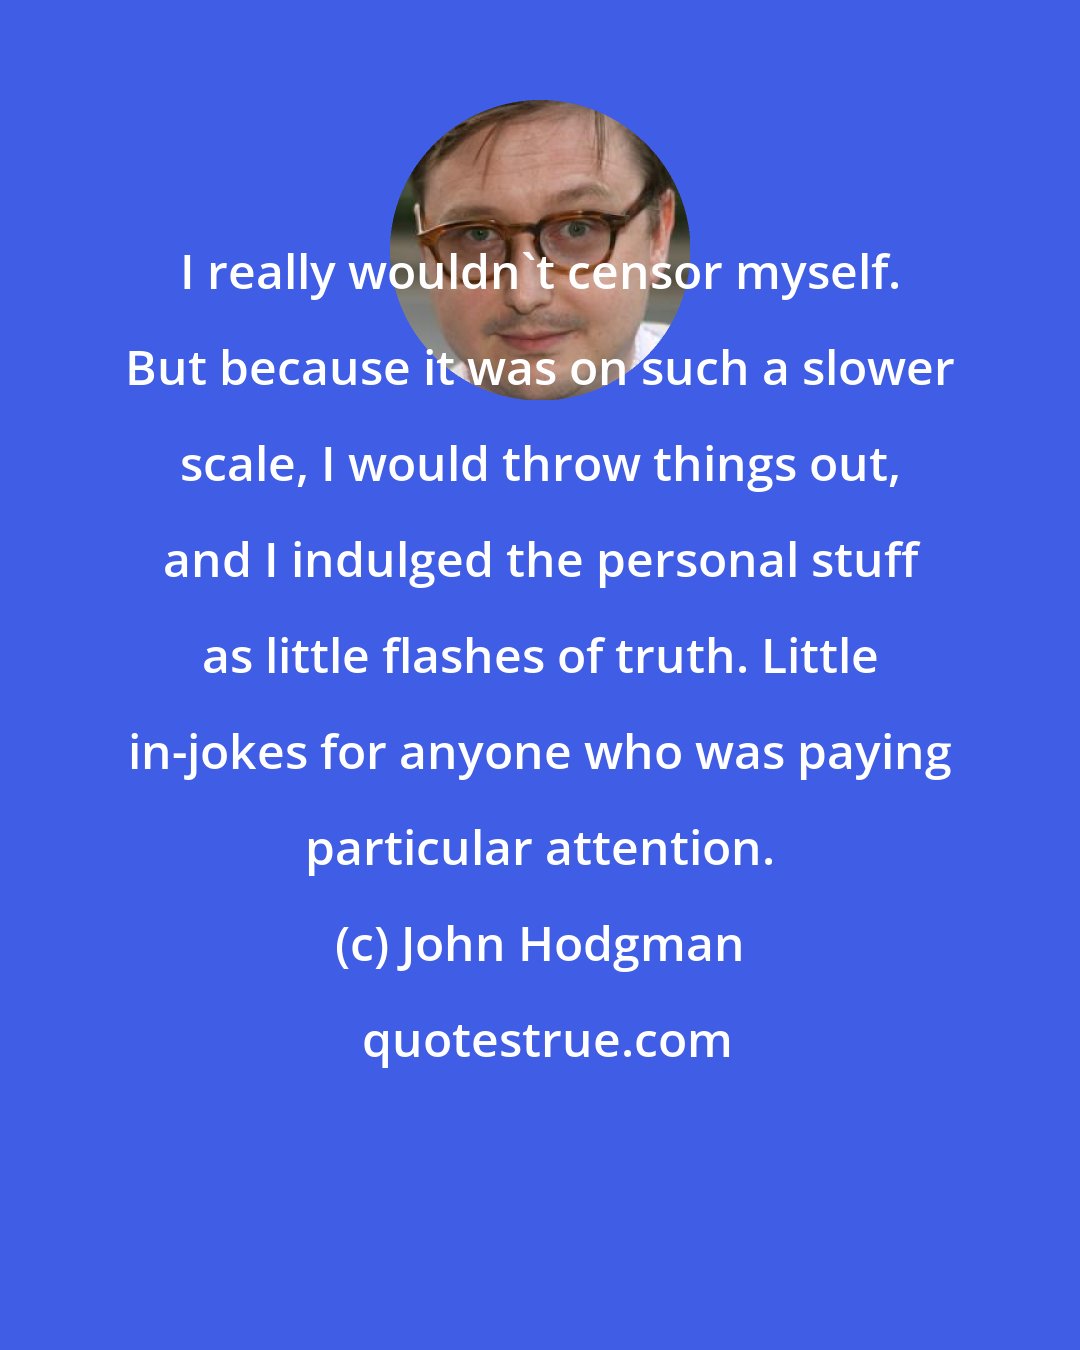 John Hodgman: I really wouldn't censor myself. But because it was on such a slower scale, I would throw things out, and I indulged the personal stuff as little flashes of truth. Little in-jokes for anyone who was paying particular attention.